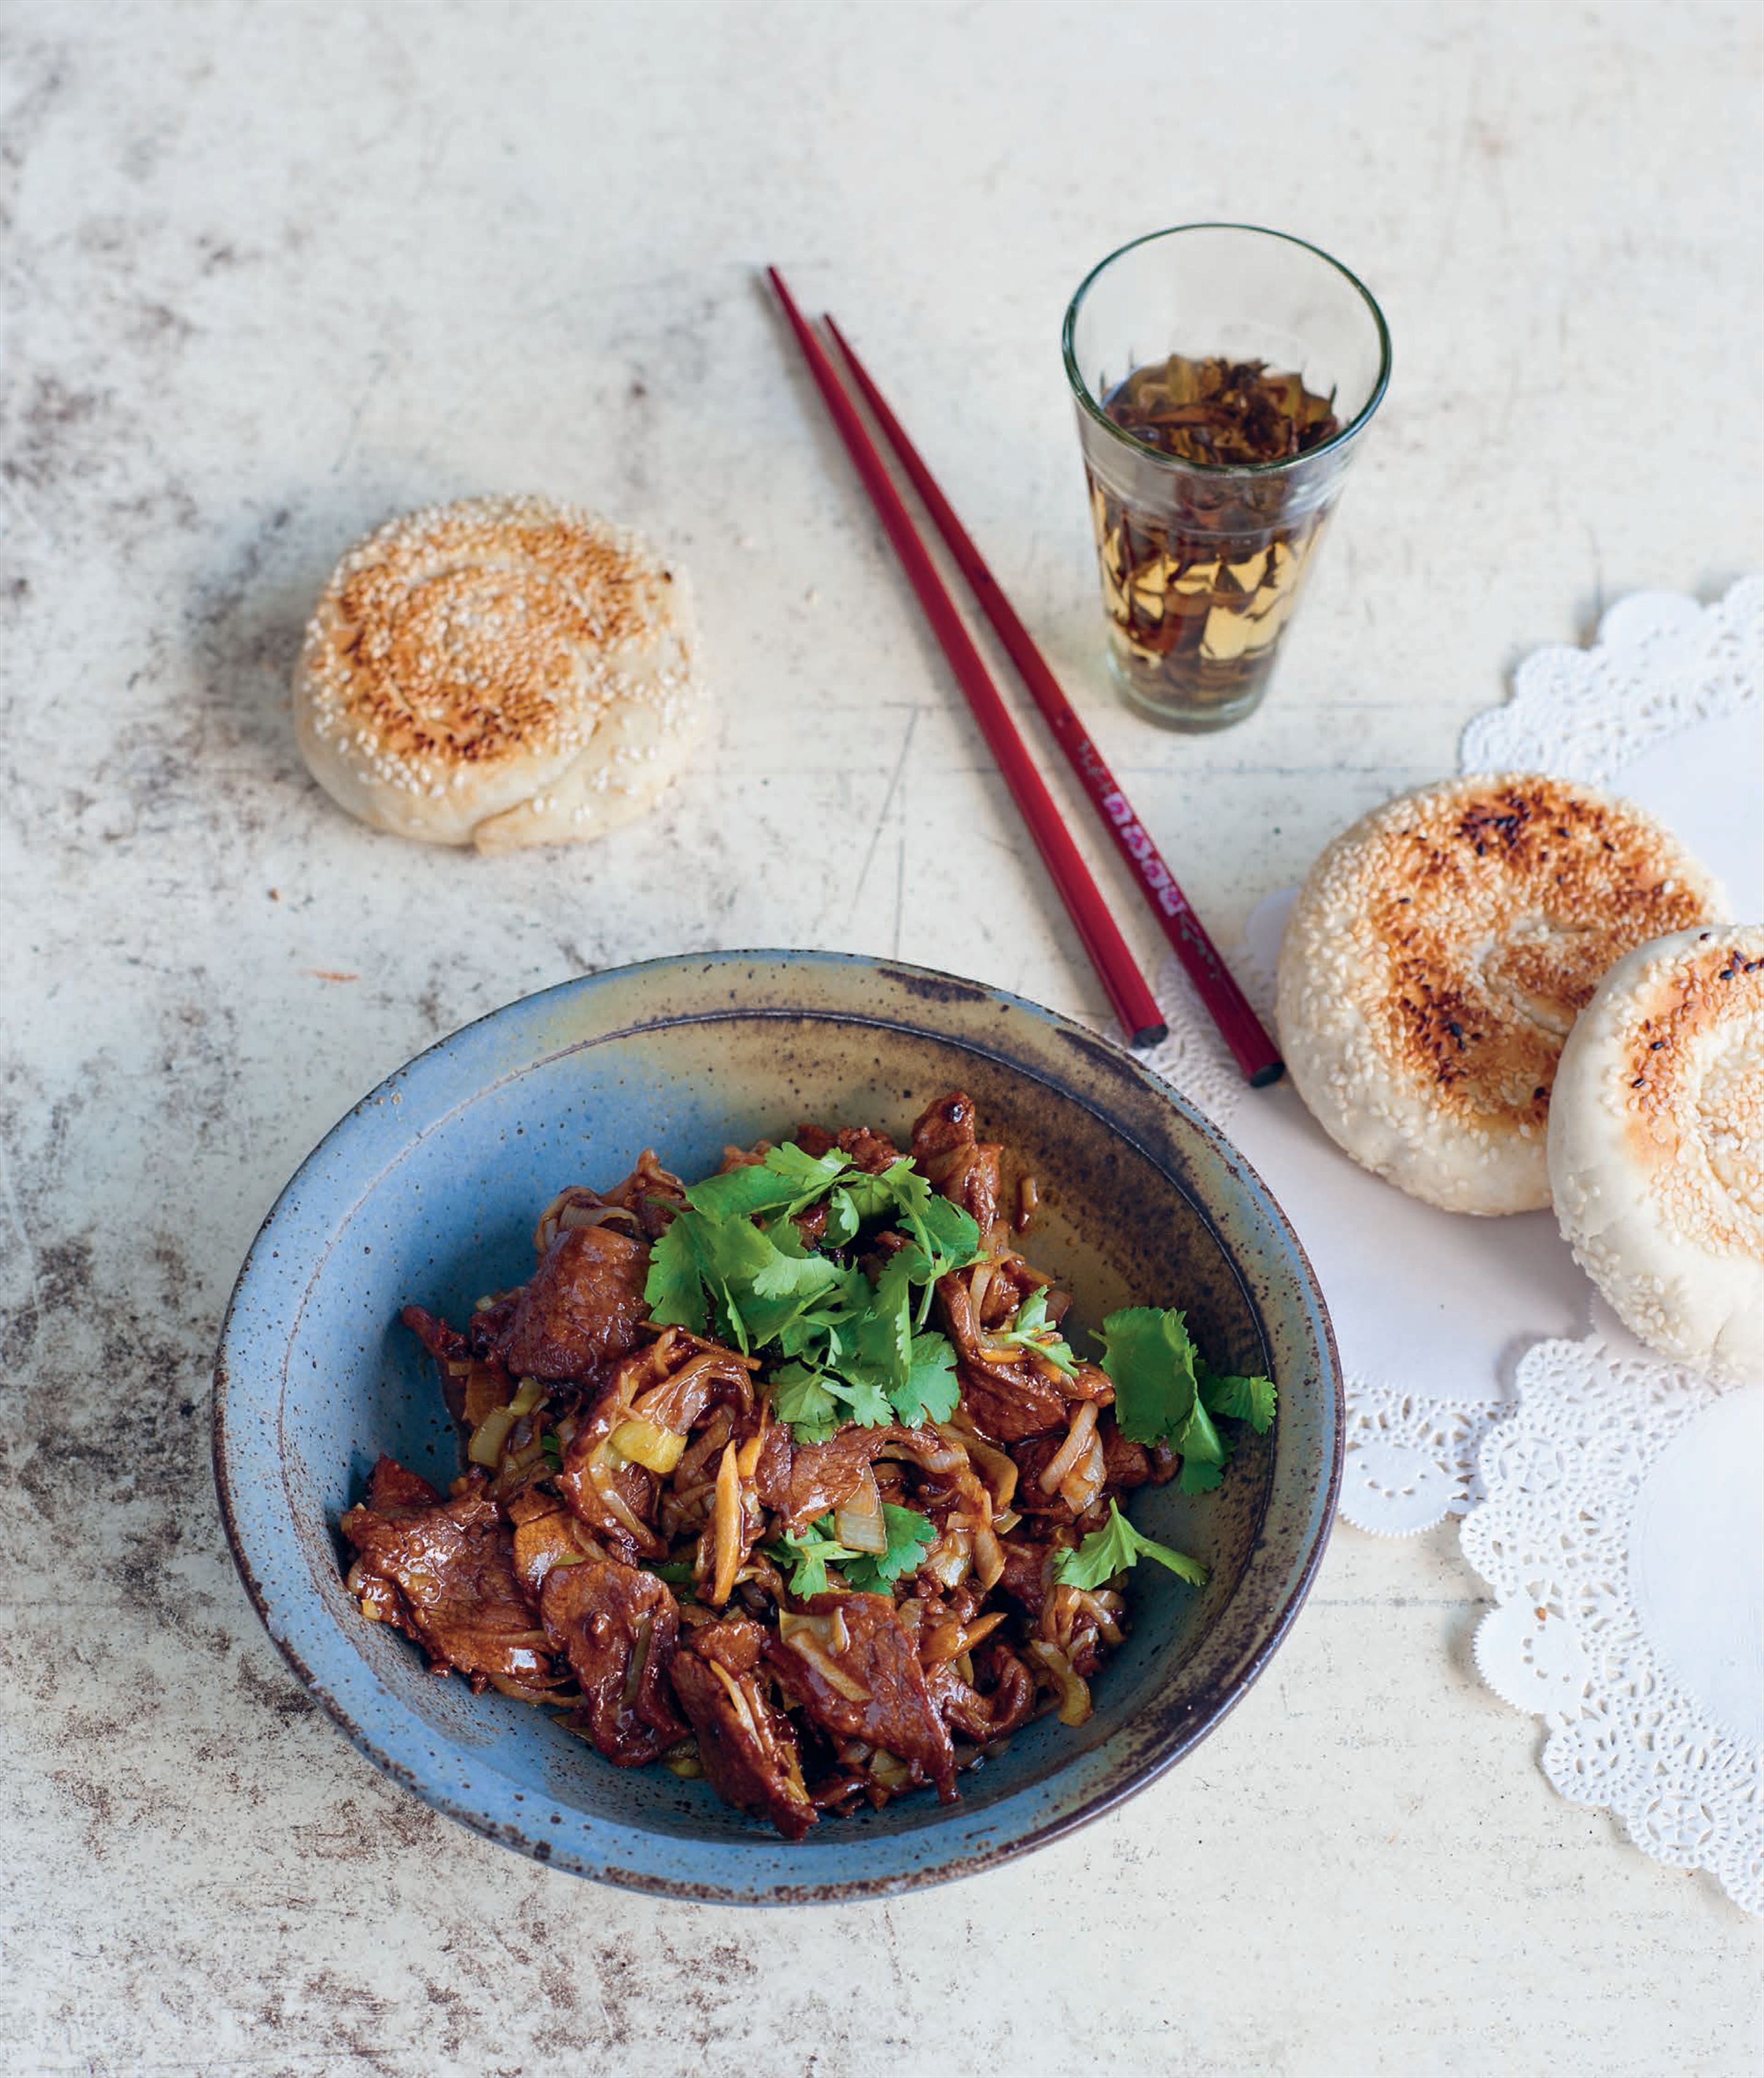 Stir-fried lamb with leeks and coriander